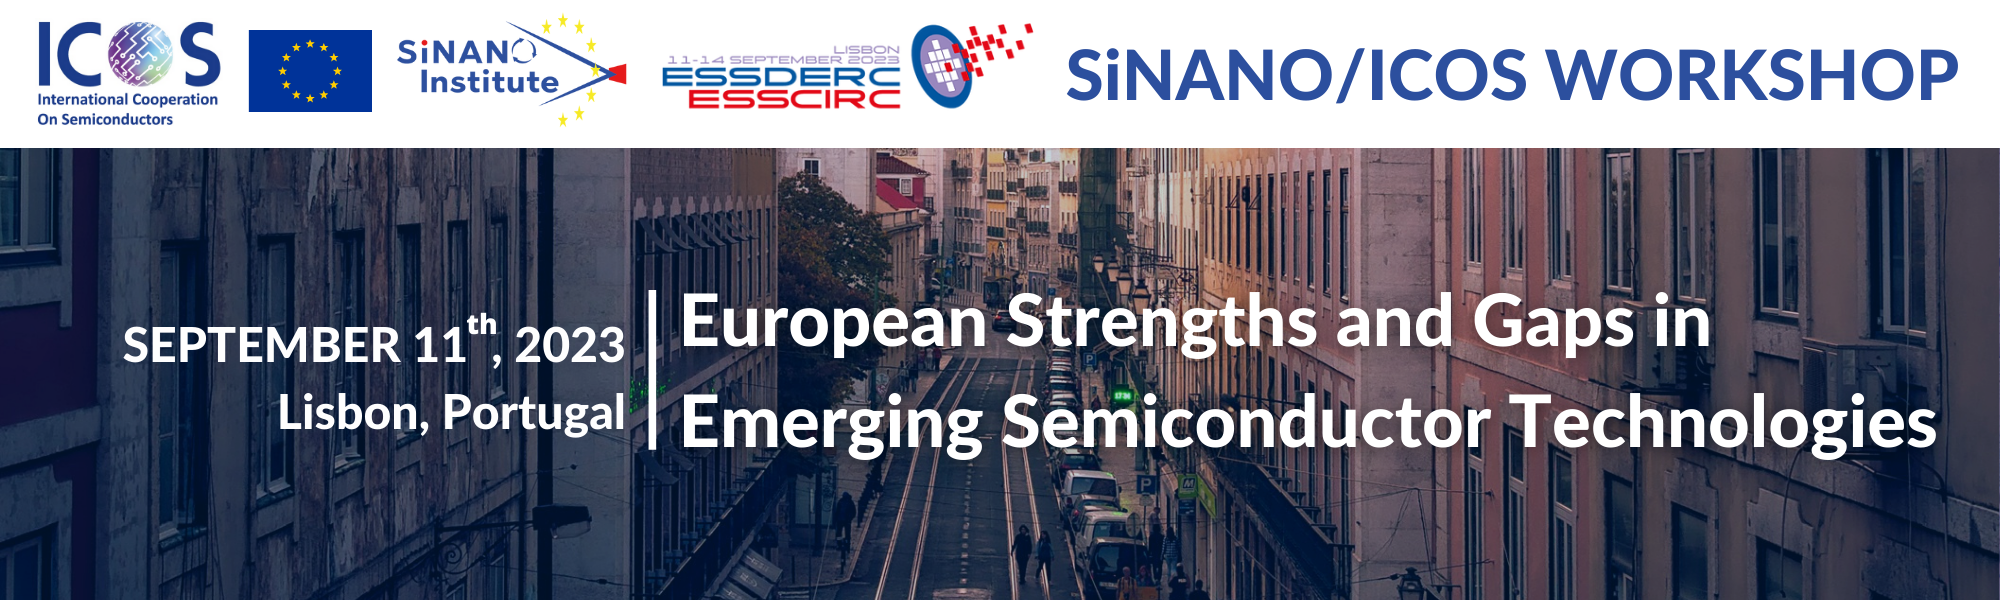 Workshop - European Strengths and Gaps in Emerging Semiconductor Technologies